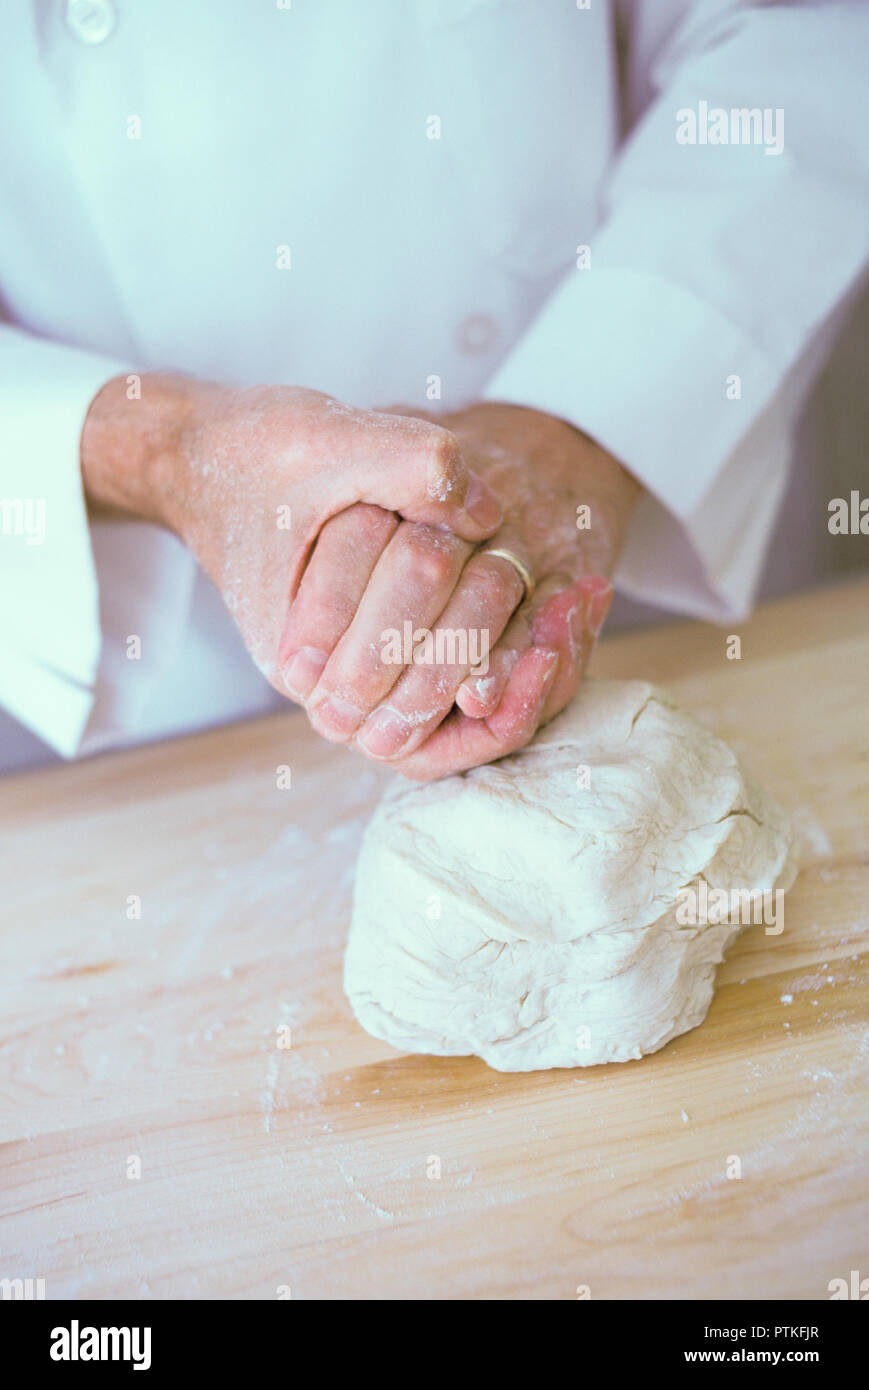 Repetitive motion hand injury to a bakery chef, USA Stock Photo